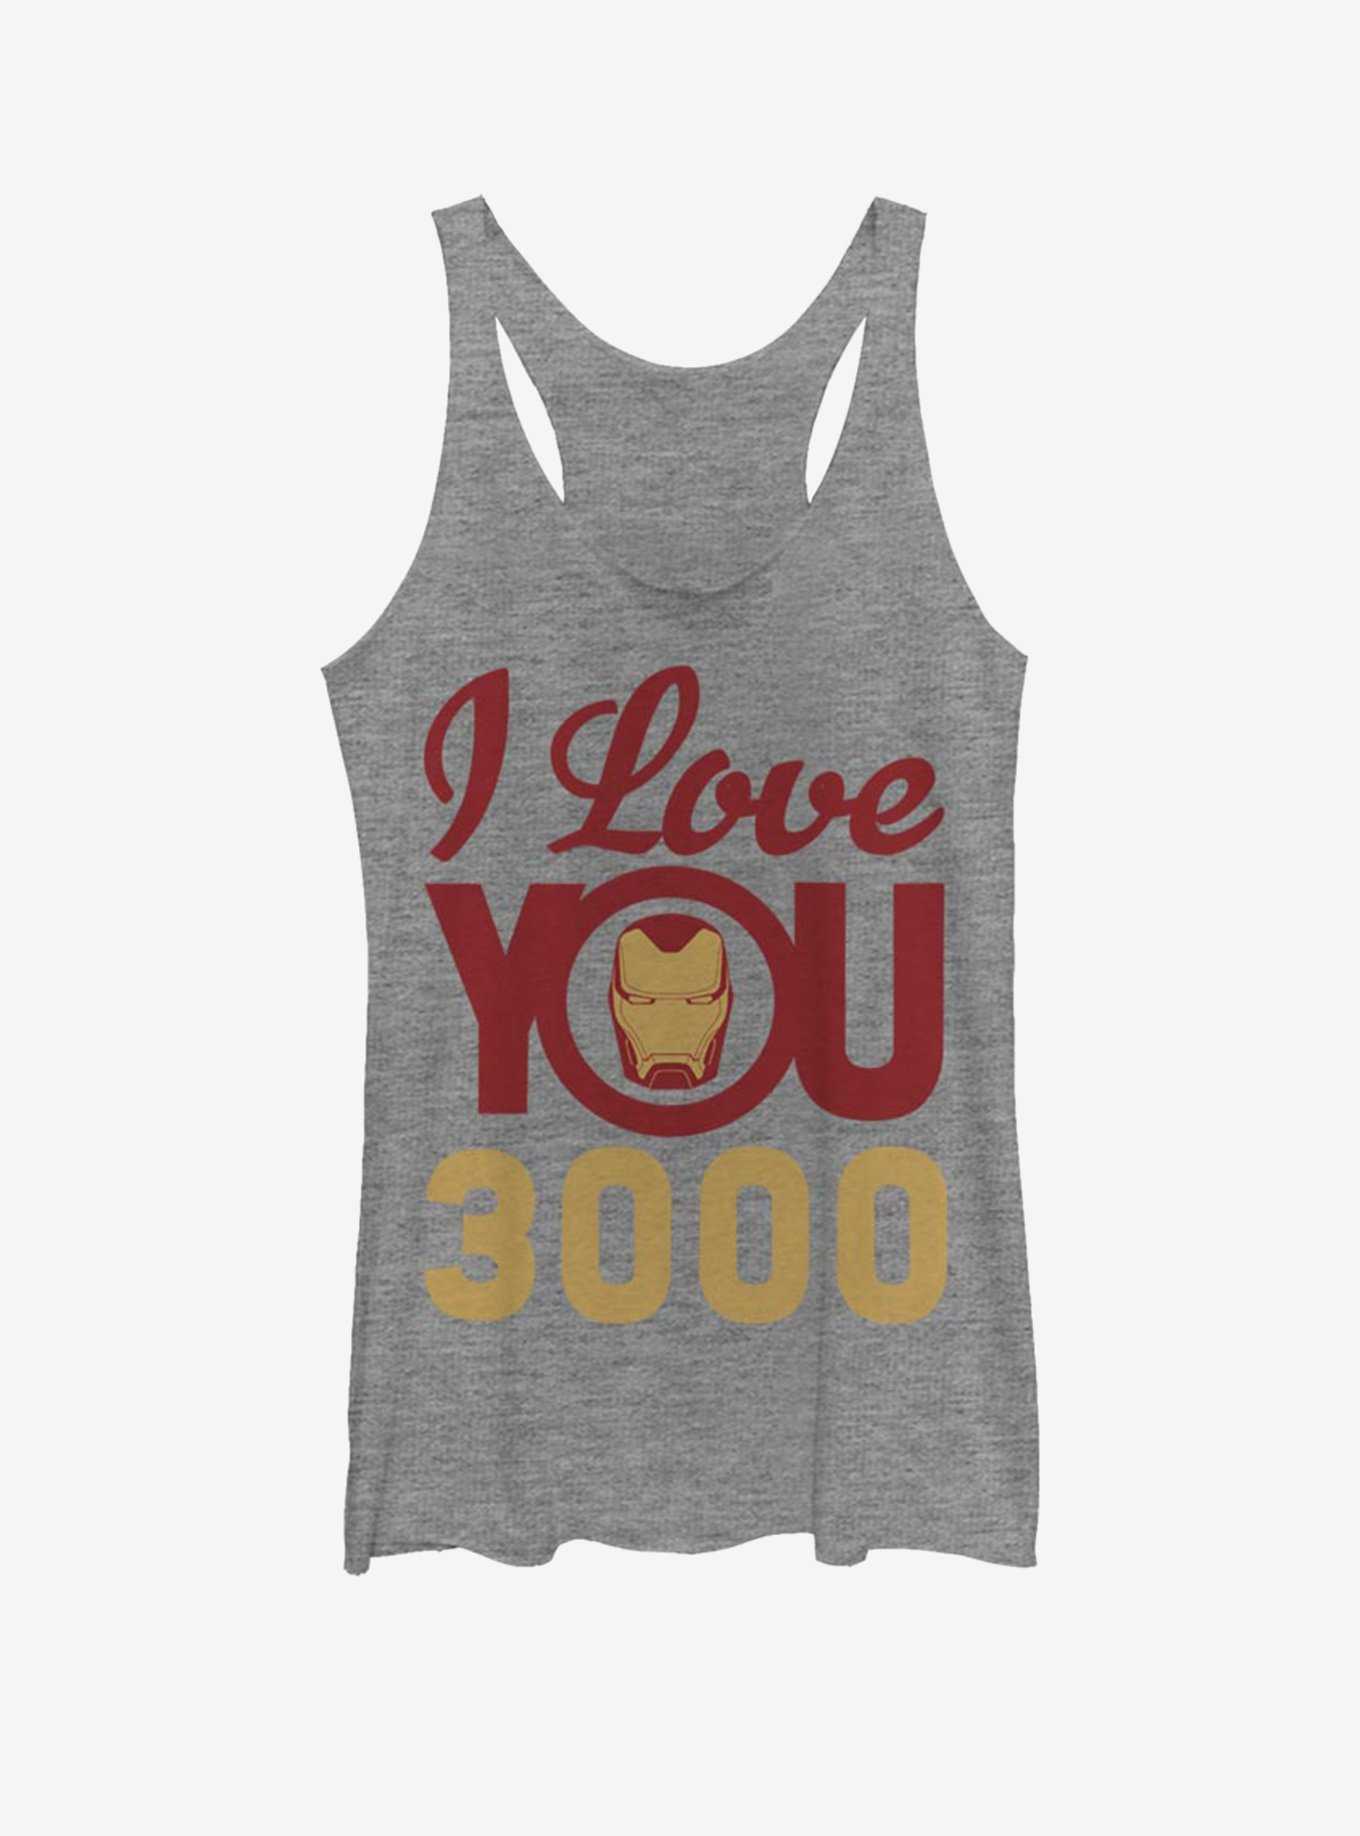 Marvel Iron Man Love You 3000 Icon Face Womens Tank Top, , hi-res